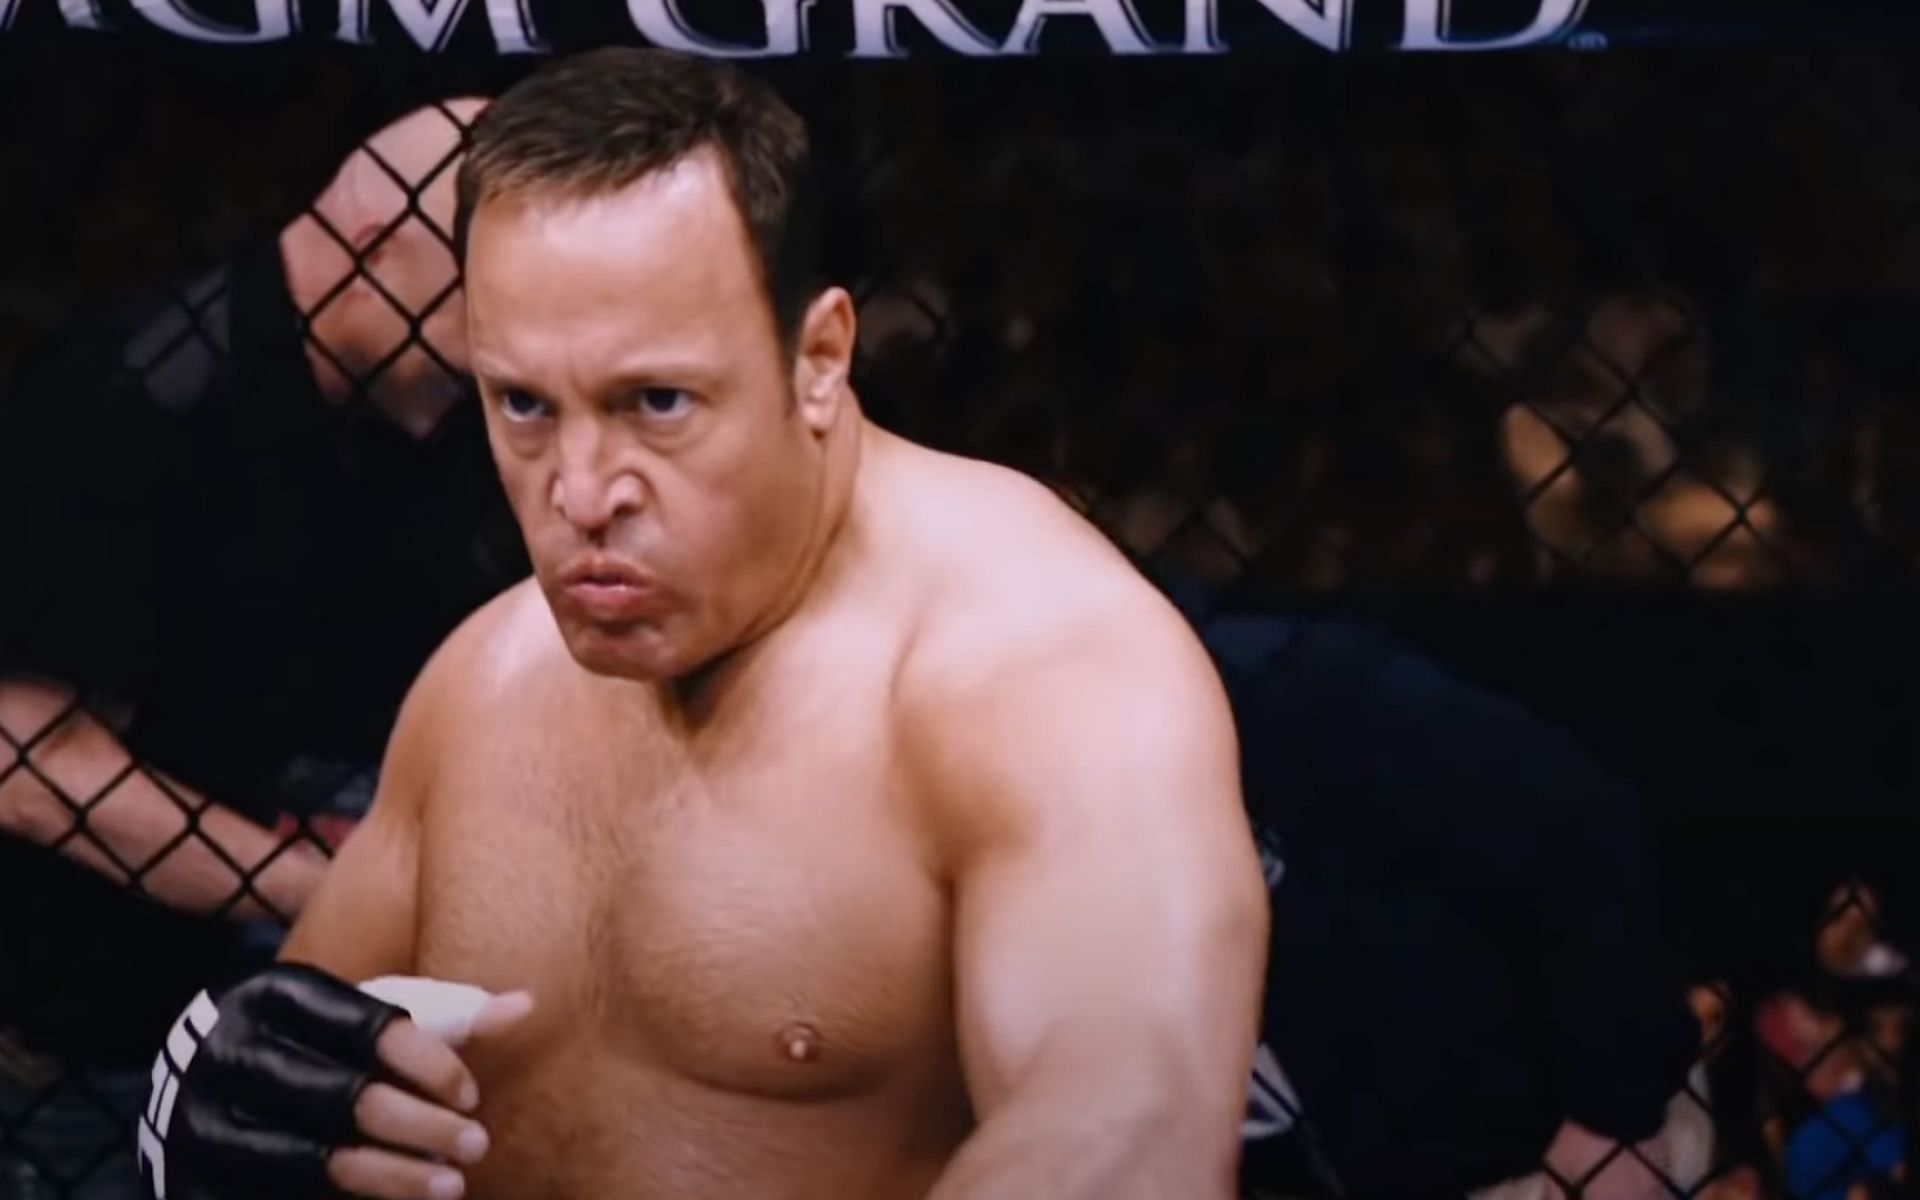 Kevin James in Here Comes the Boom (2012) (Image Courtesy - @HOLLYWOOD on YouTube)